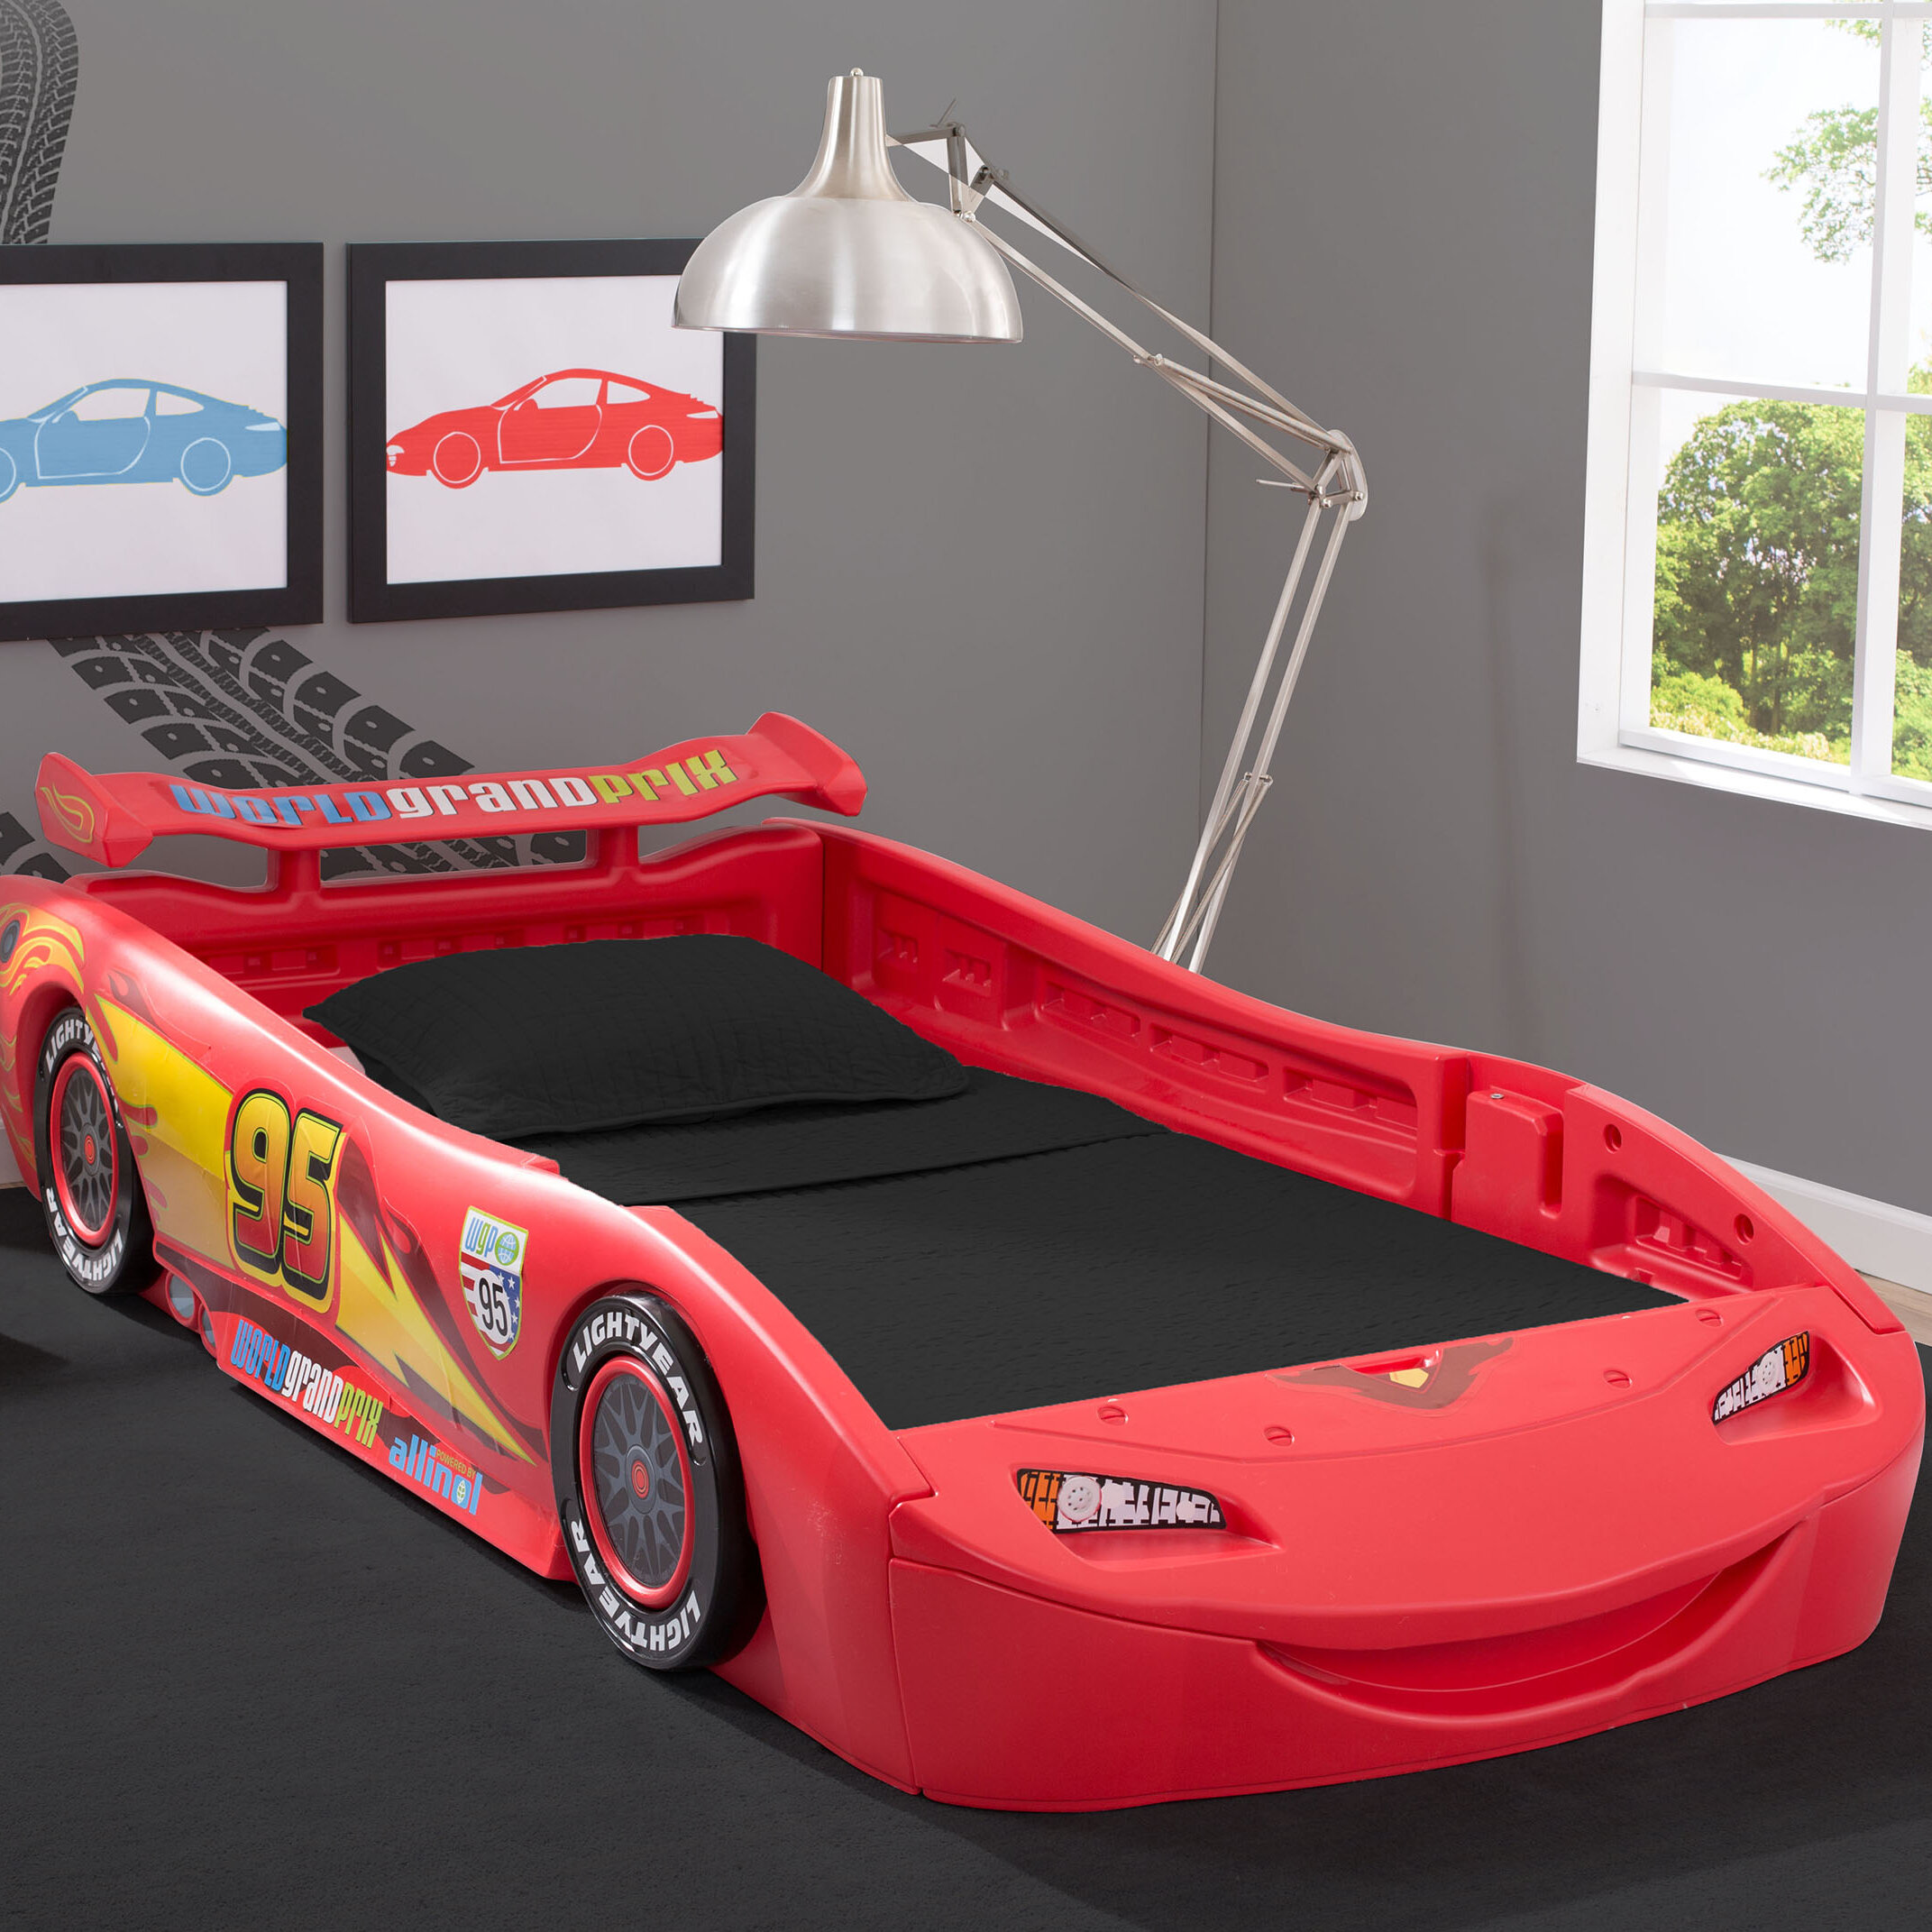 race car twin bed clearance